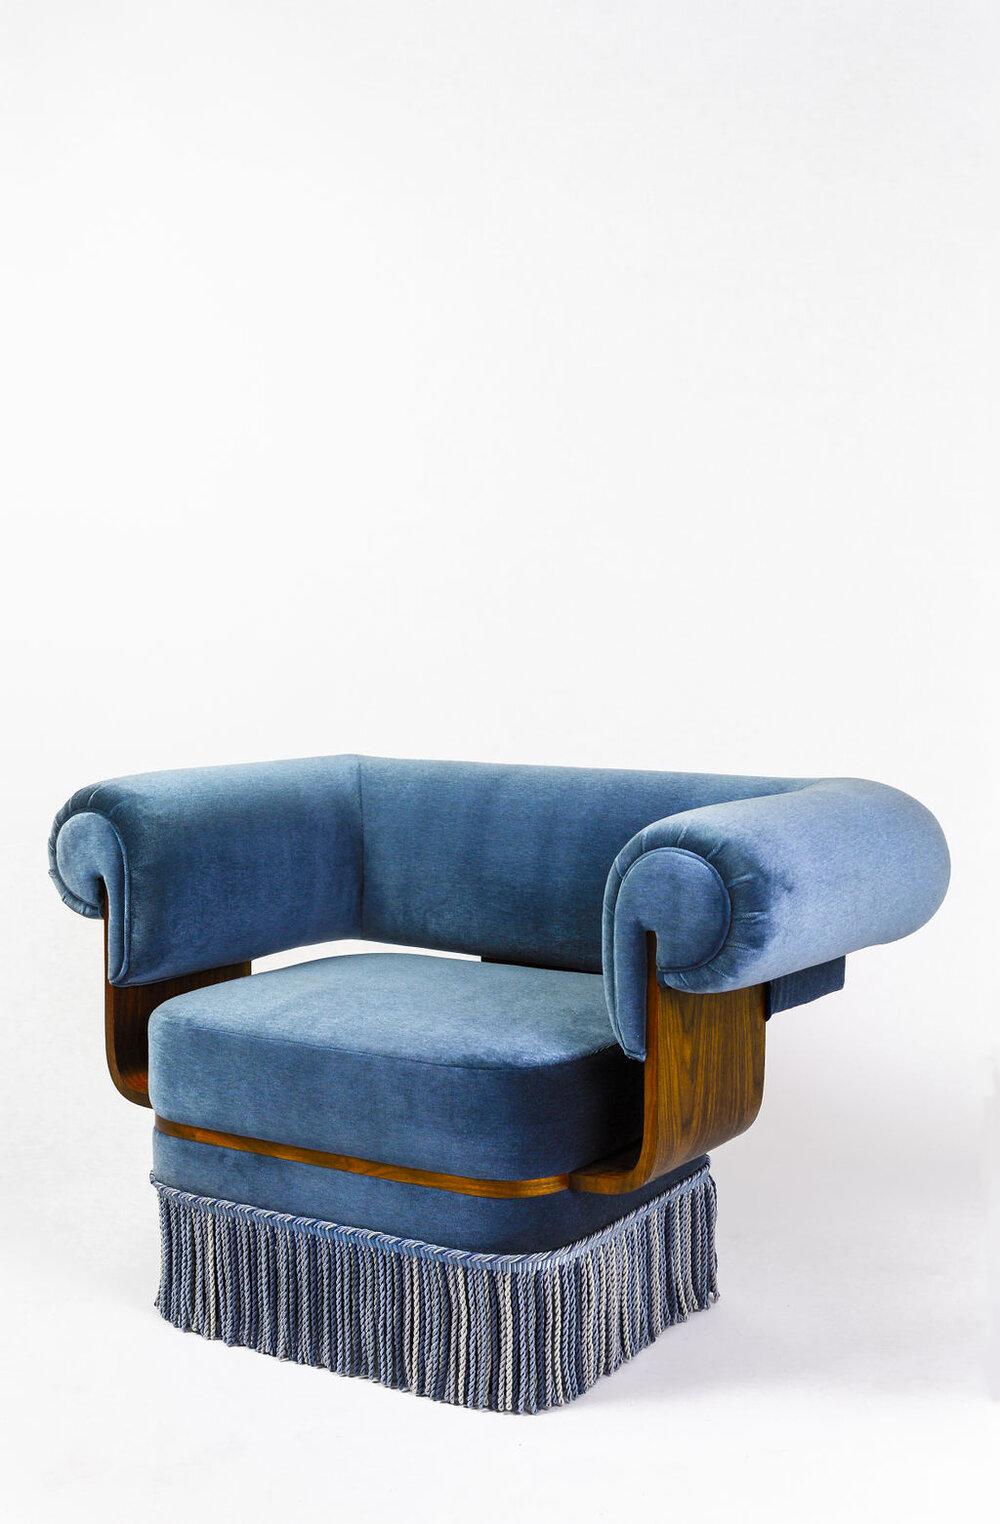 The Morris armchair features bent walnut wood that accents the curved upholstery. The chair proves to be perfect for lounging with a large seat and comfortable arms. The chair is upholstered in blue mohair and completed with 8.25” silk bullion